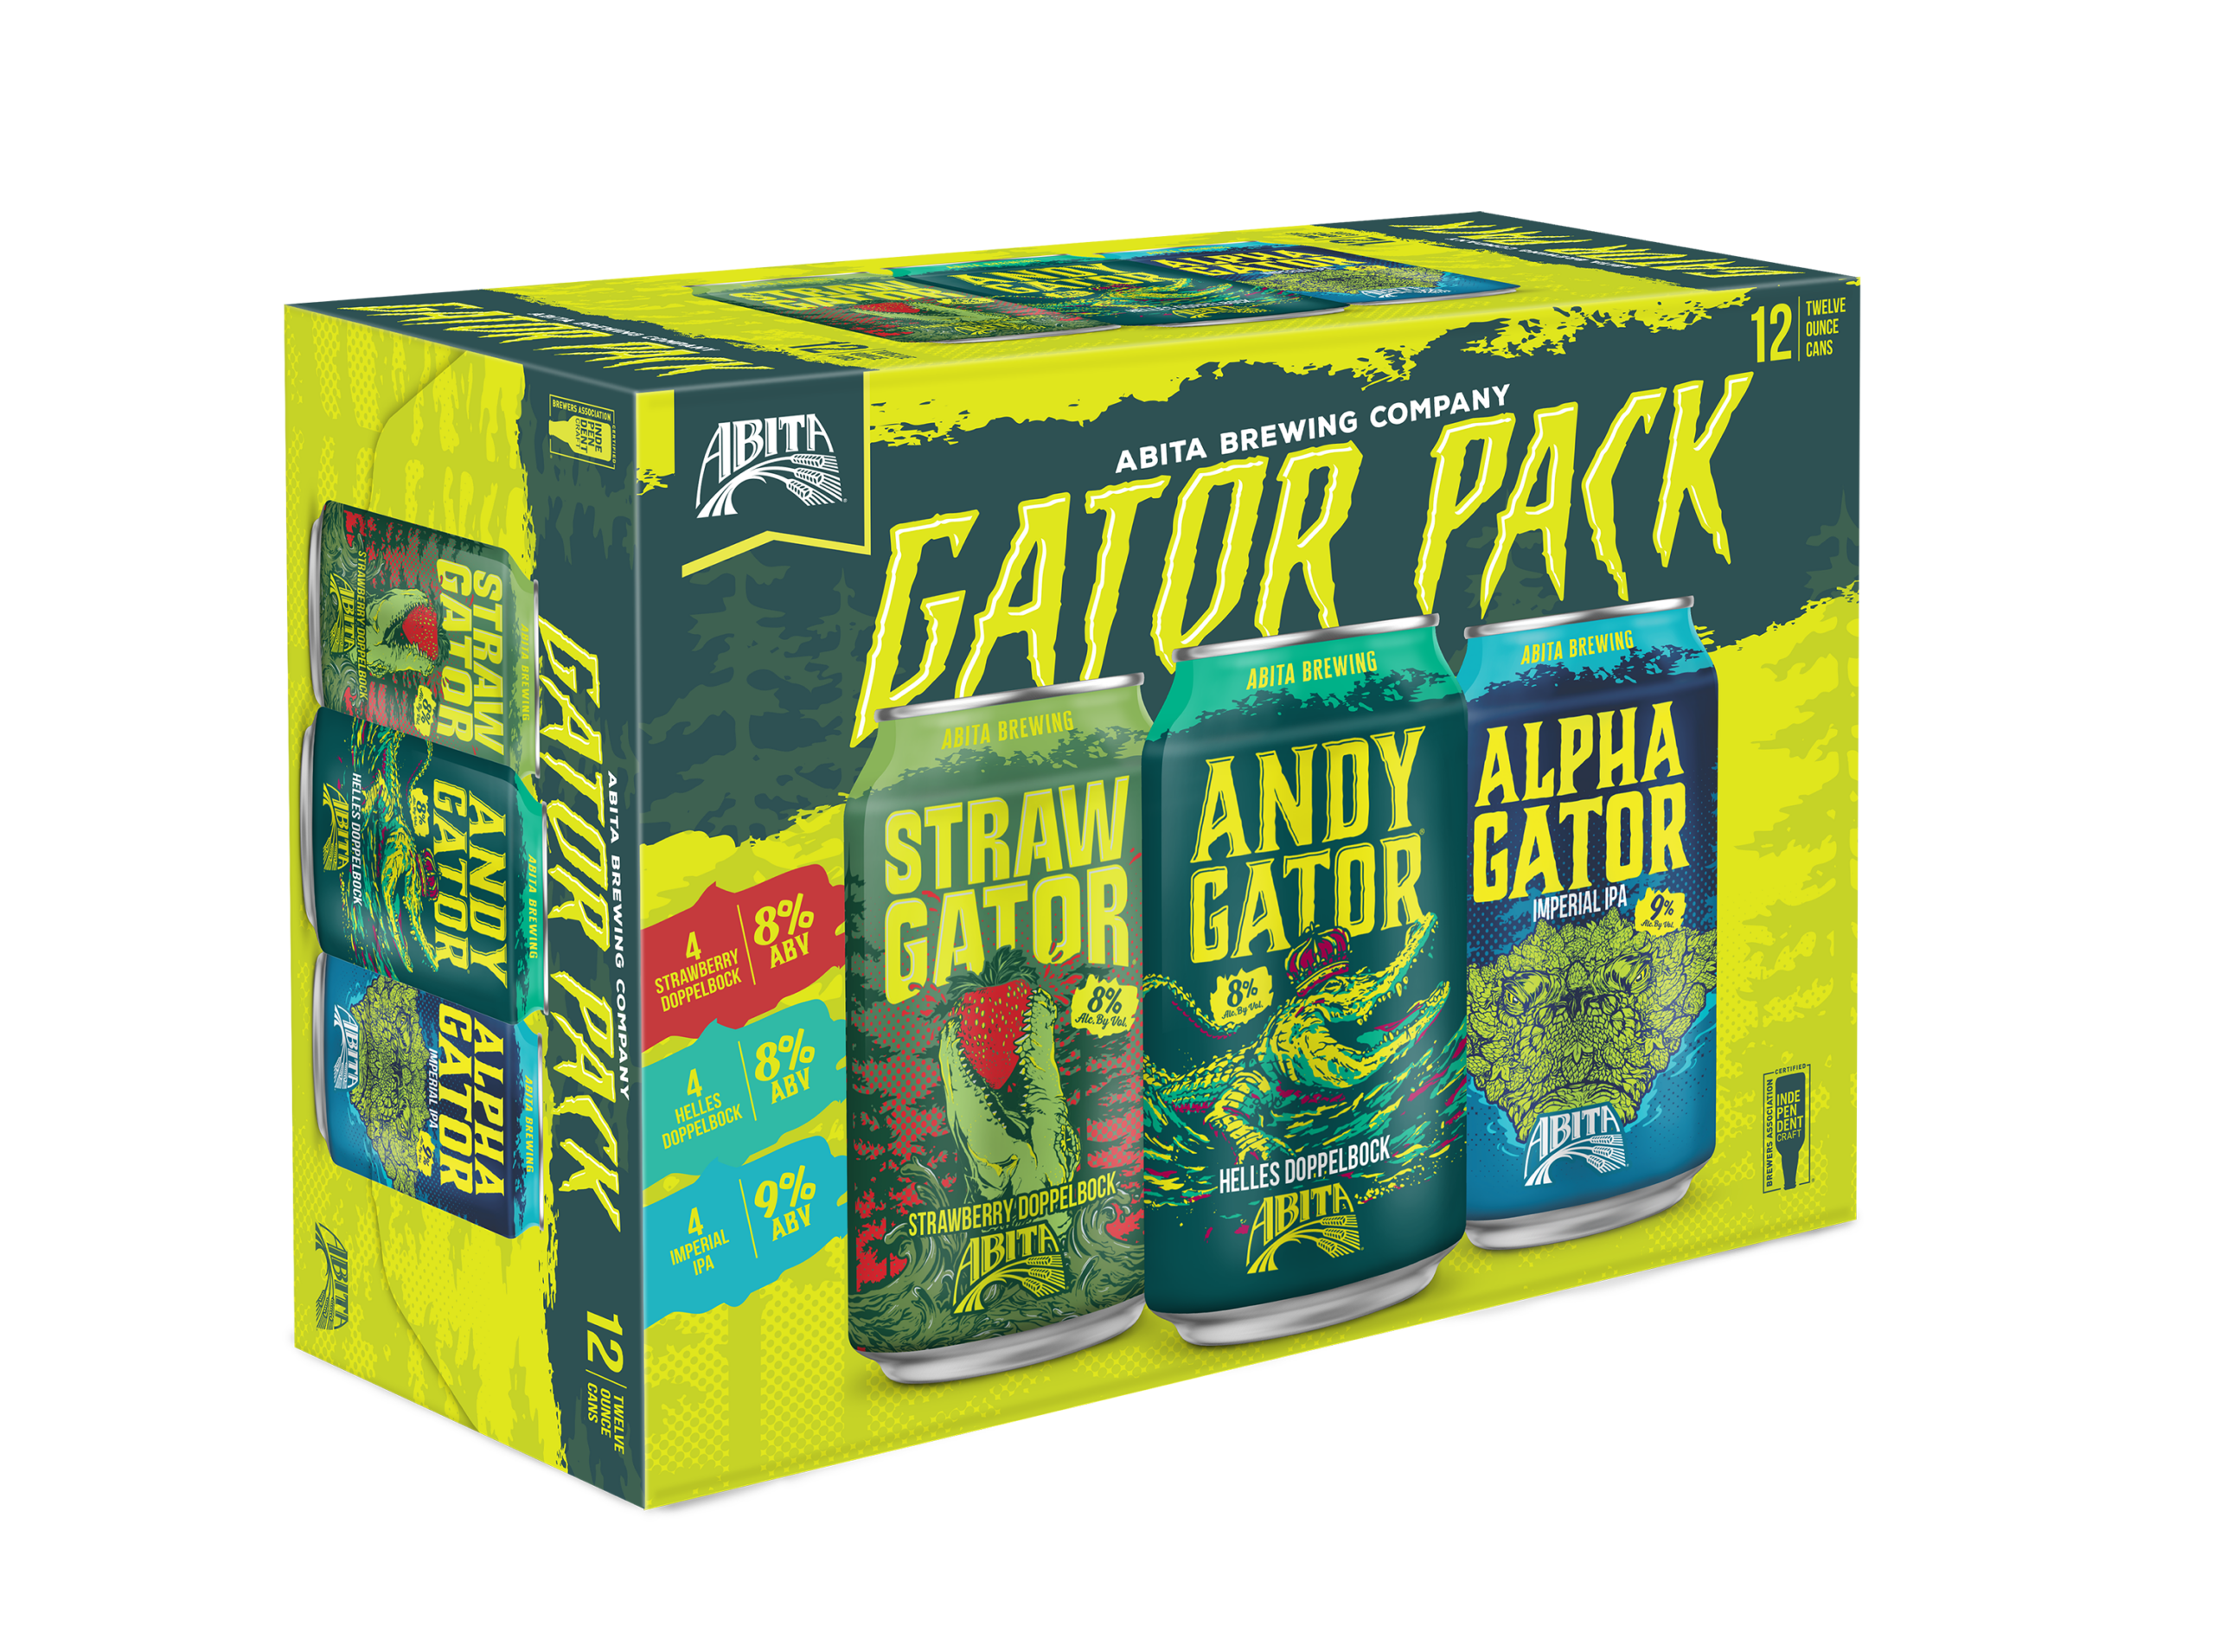 gator family pack. featuring 3 abita beers with gator in the name